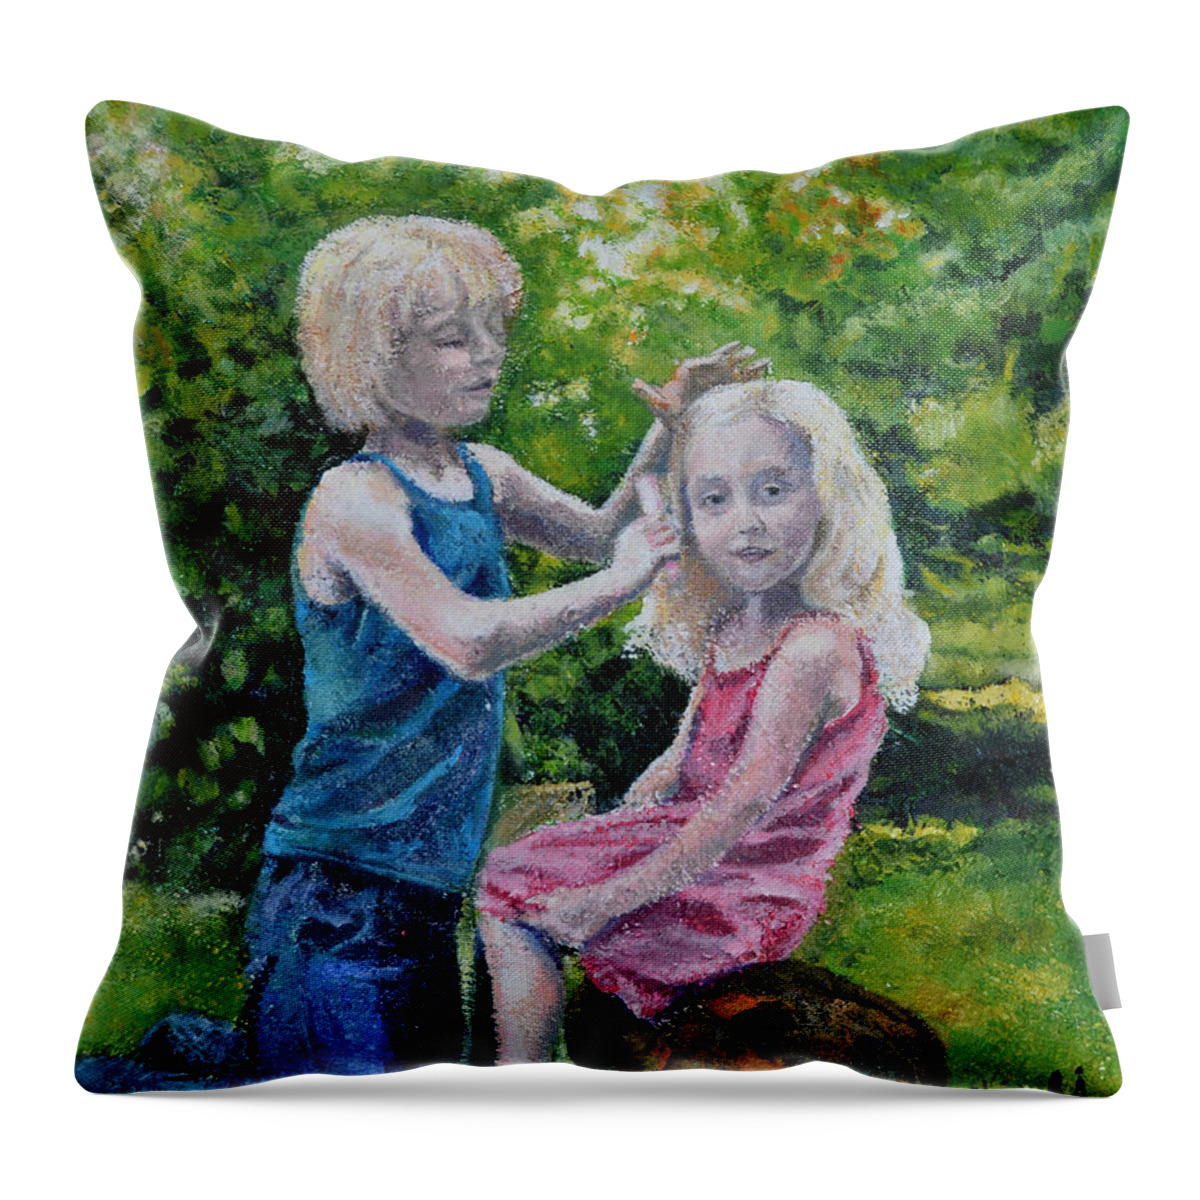 Girls Throw Pillow featuring the painting Sisters by Elaine Berger